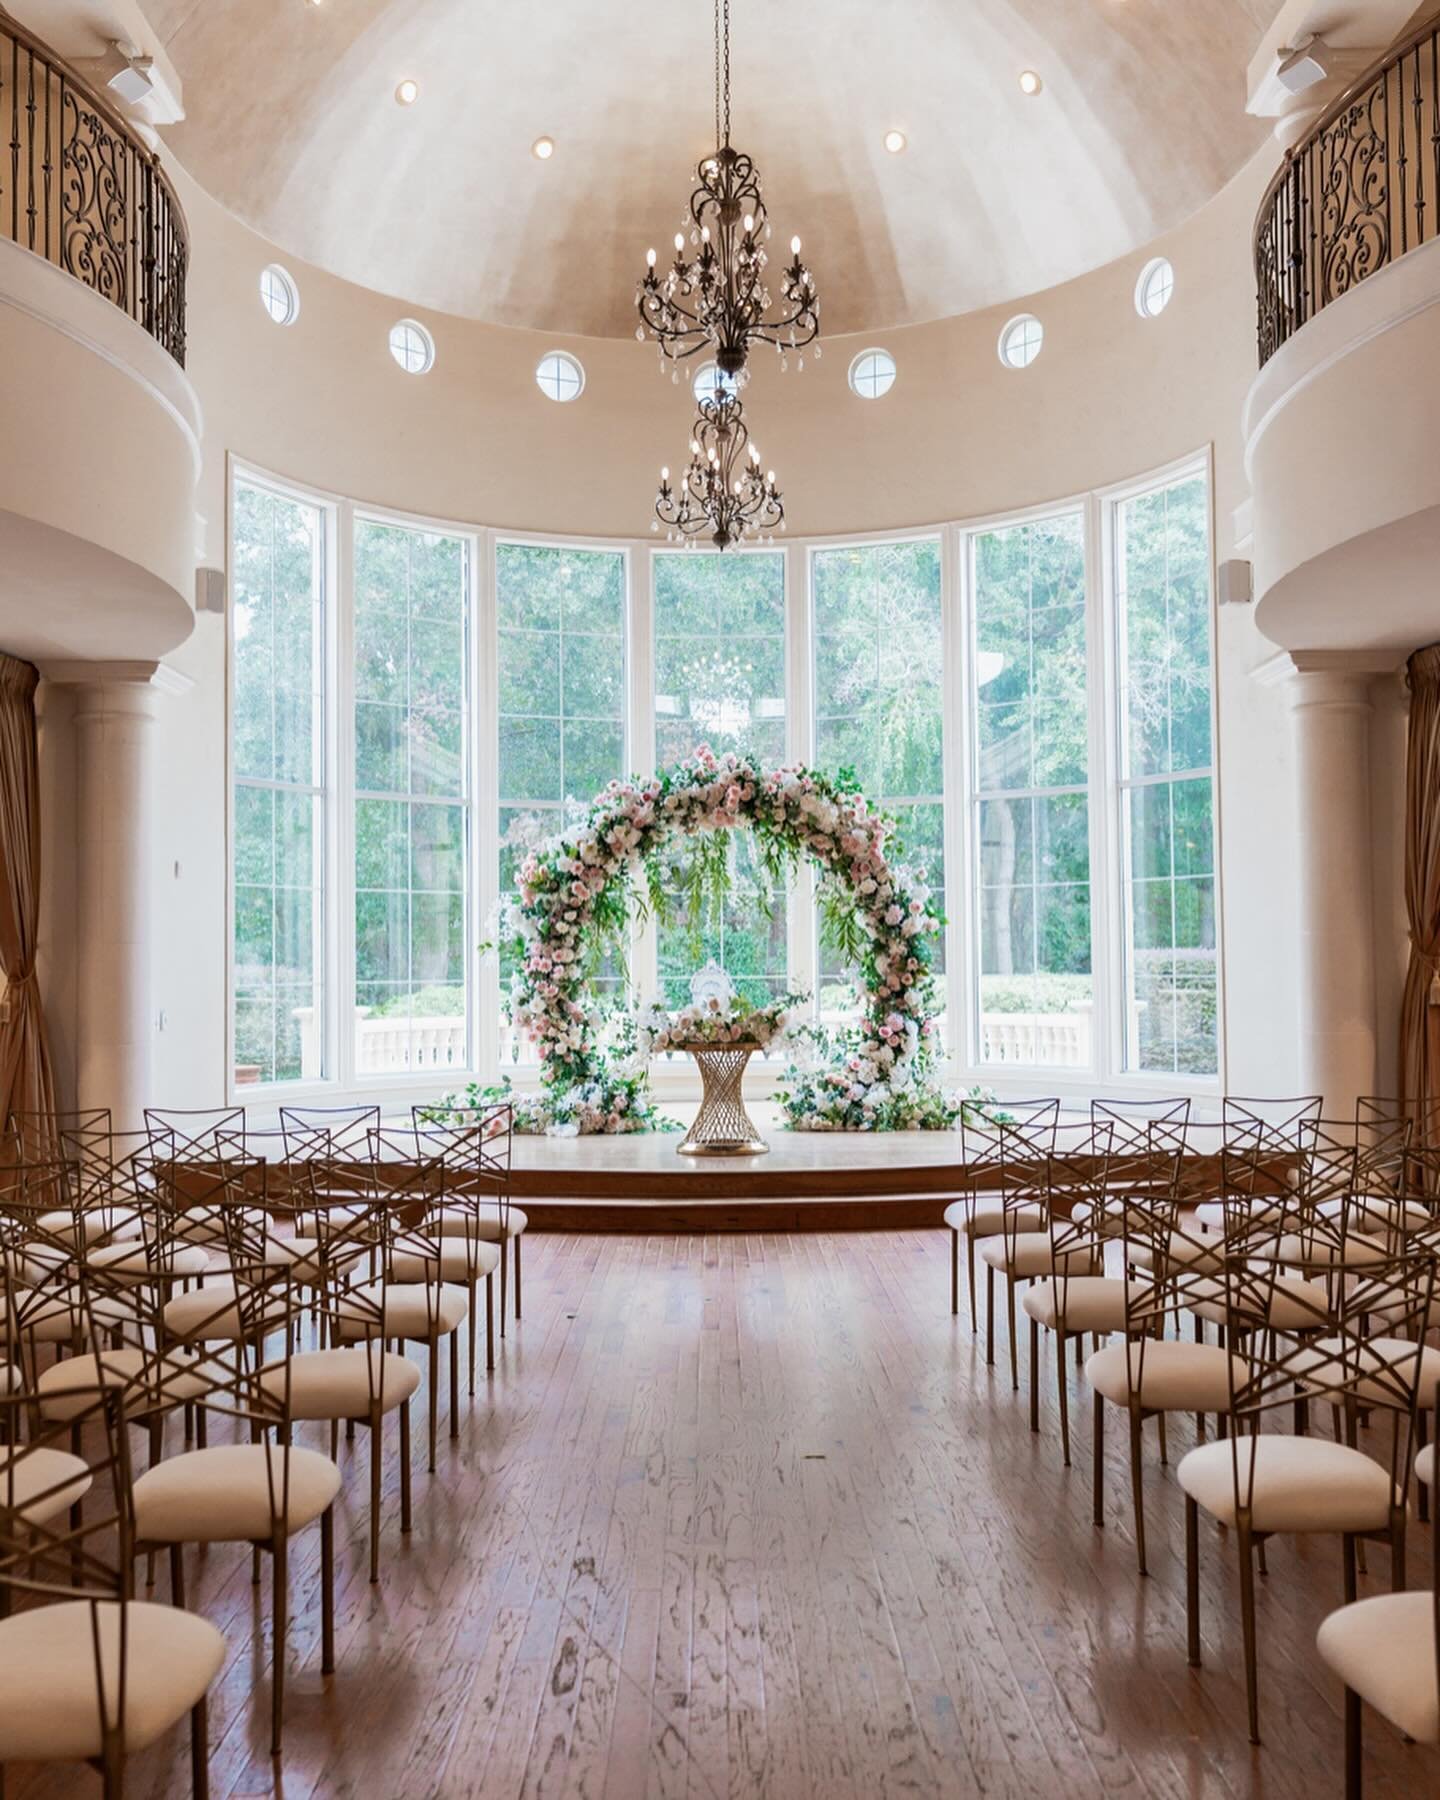 We create the perfect marriage of style and substance that elevates a space from ordinary to extraordinary!
Venue: @springsvenuecypress 
Floral&amp;Decor: @kimevents7 
Tea Ceremony: @kimevents7 @dvminhthuy 
Planner: @abridesbestie.atx
Bride: @foodwit